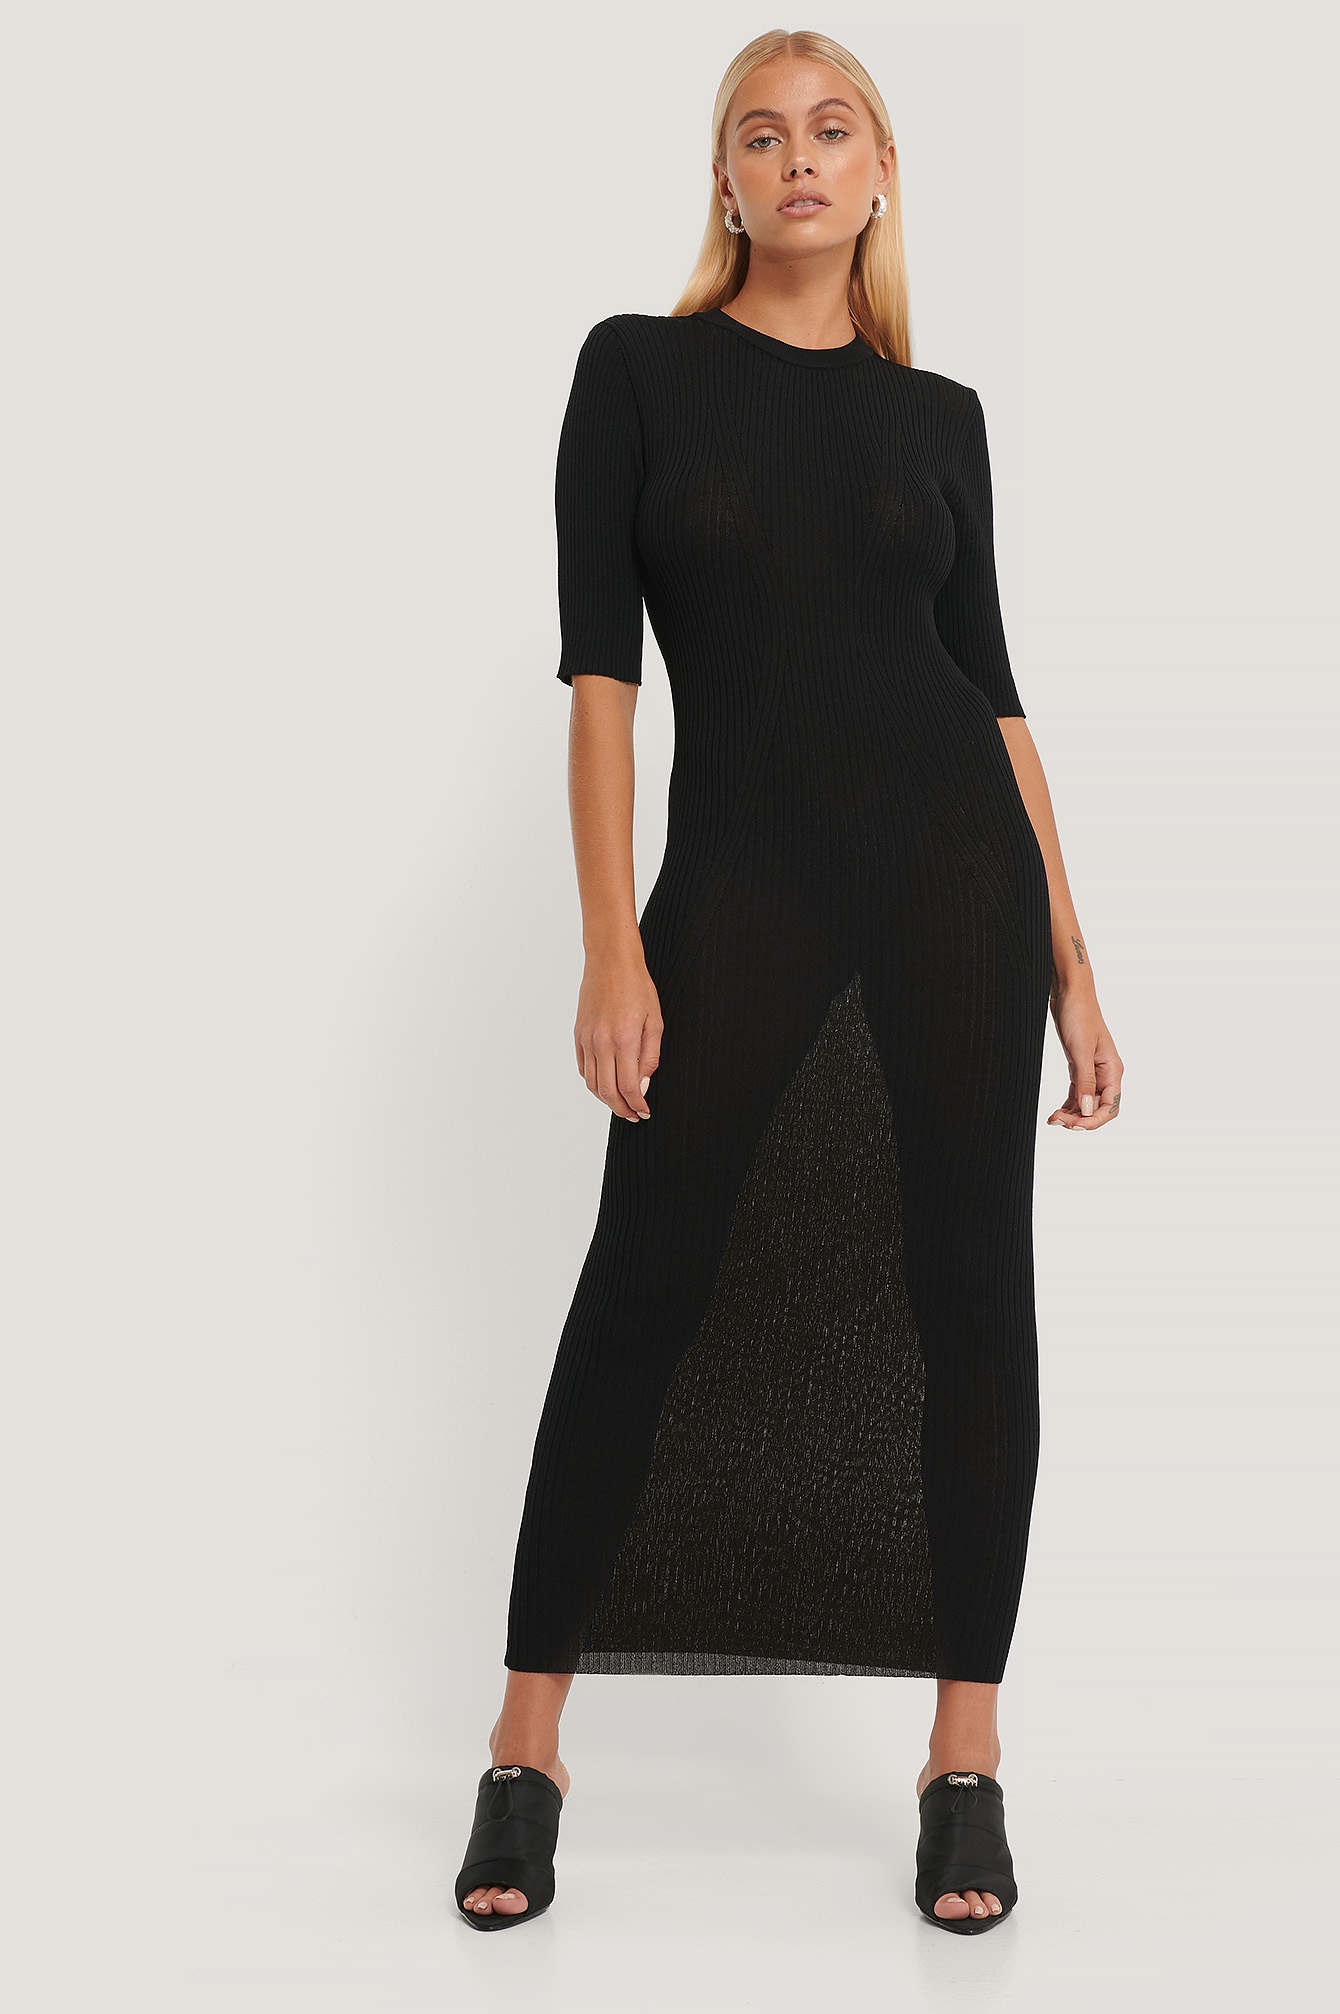 Black 3/4 Sleeve Ribbed Knitted Dress